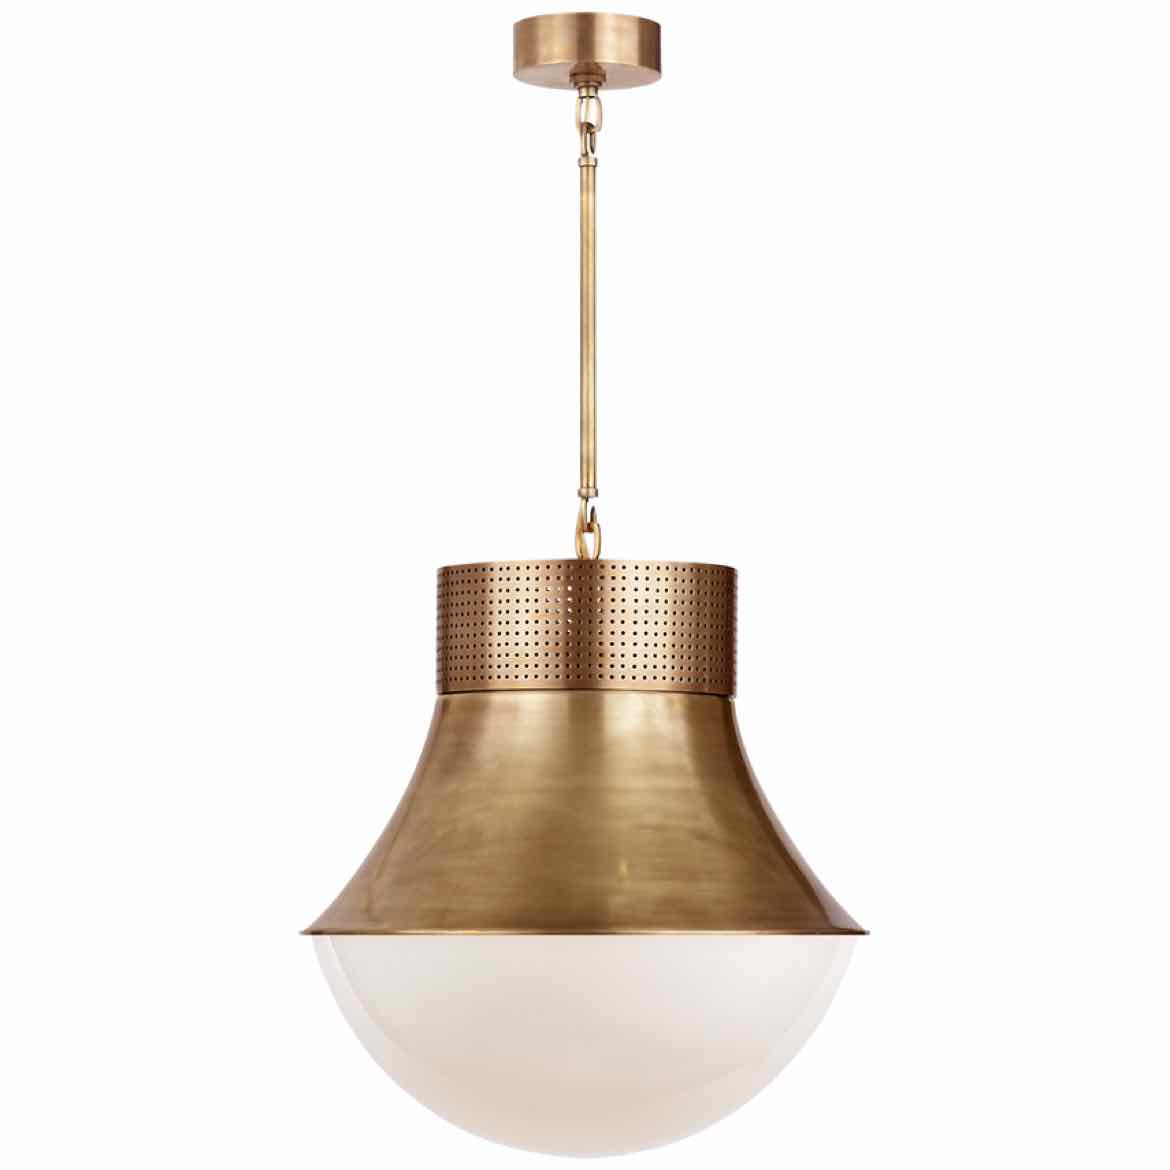 Precision Large Pendant in Antique Burnished Brass by Kelly Wearstler